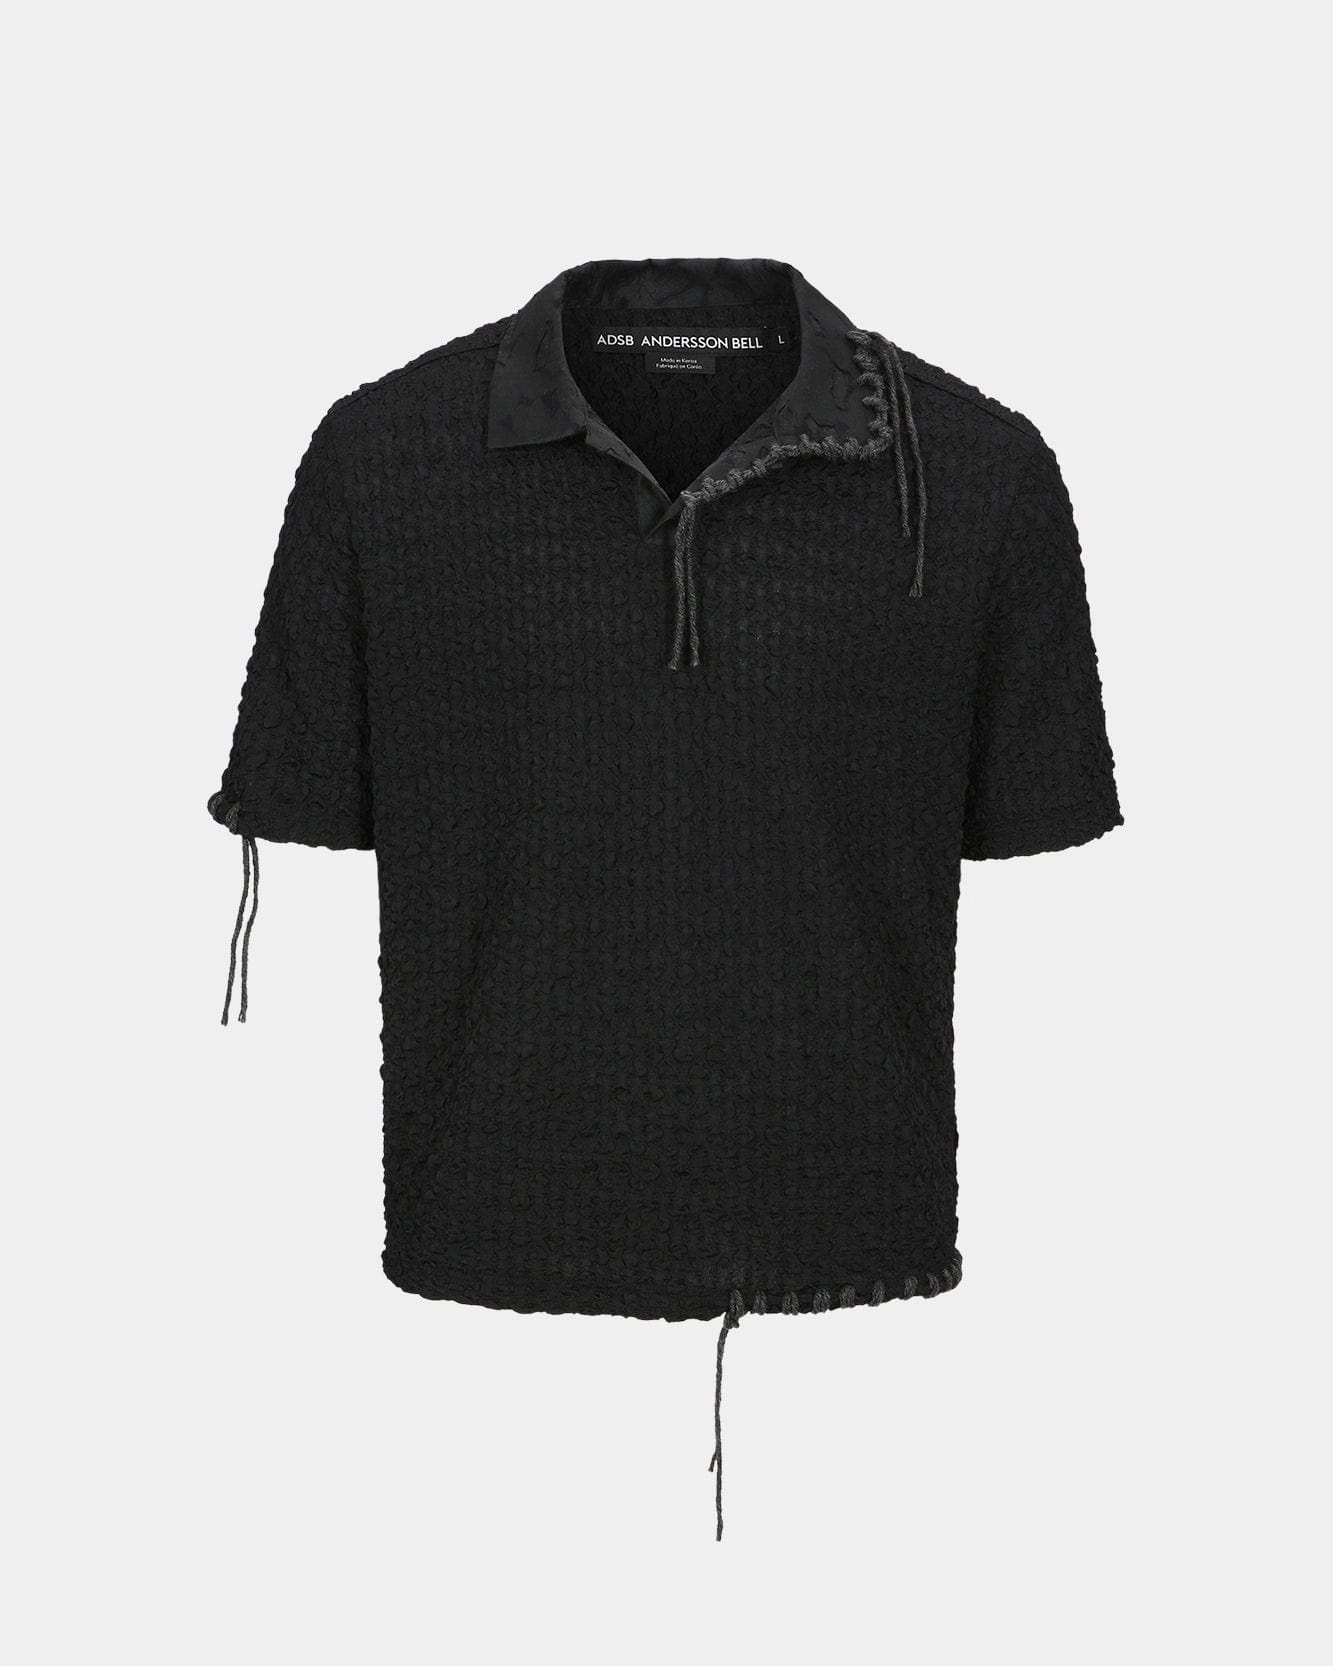 Andersson Bell SAPA BUBBLE KNIT atb1070m(BLACK)